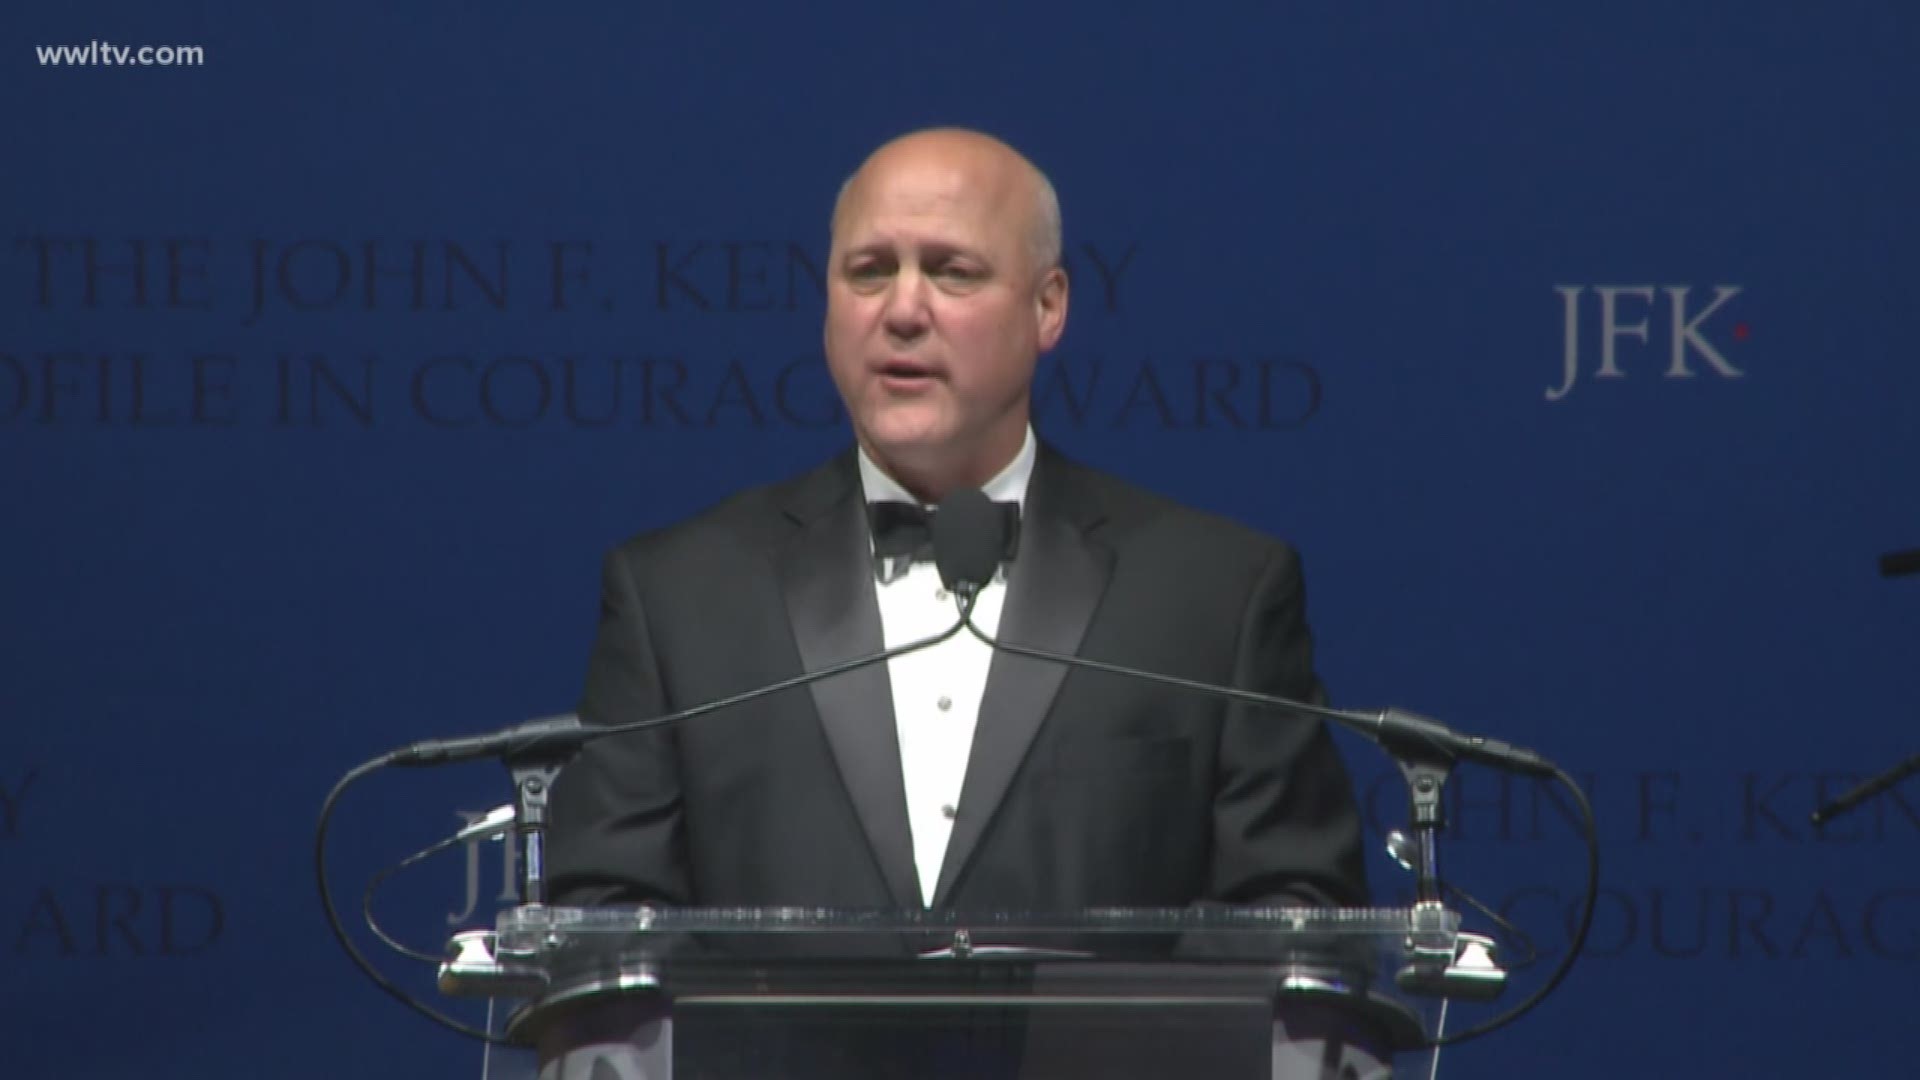 Landrieu honored with JFK award for leadership in removing Confederate monuments